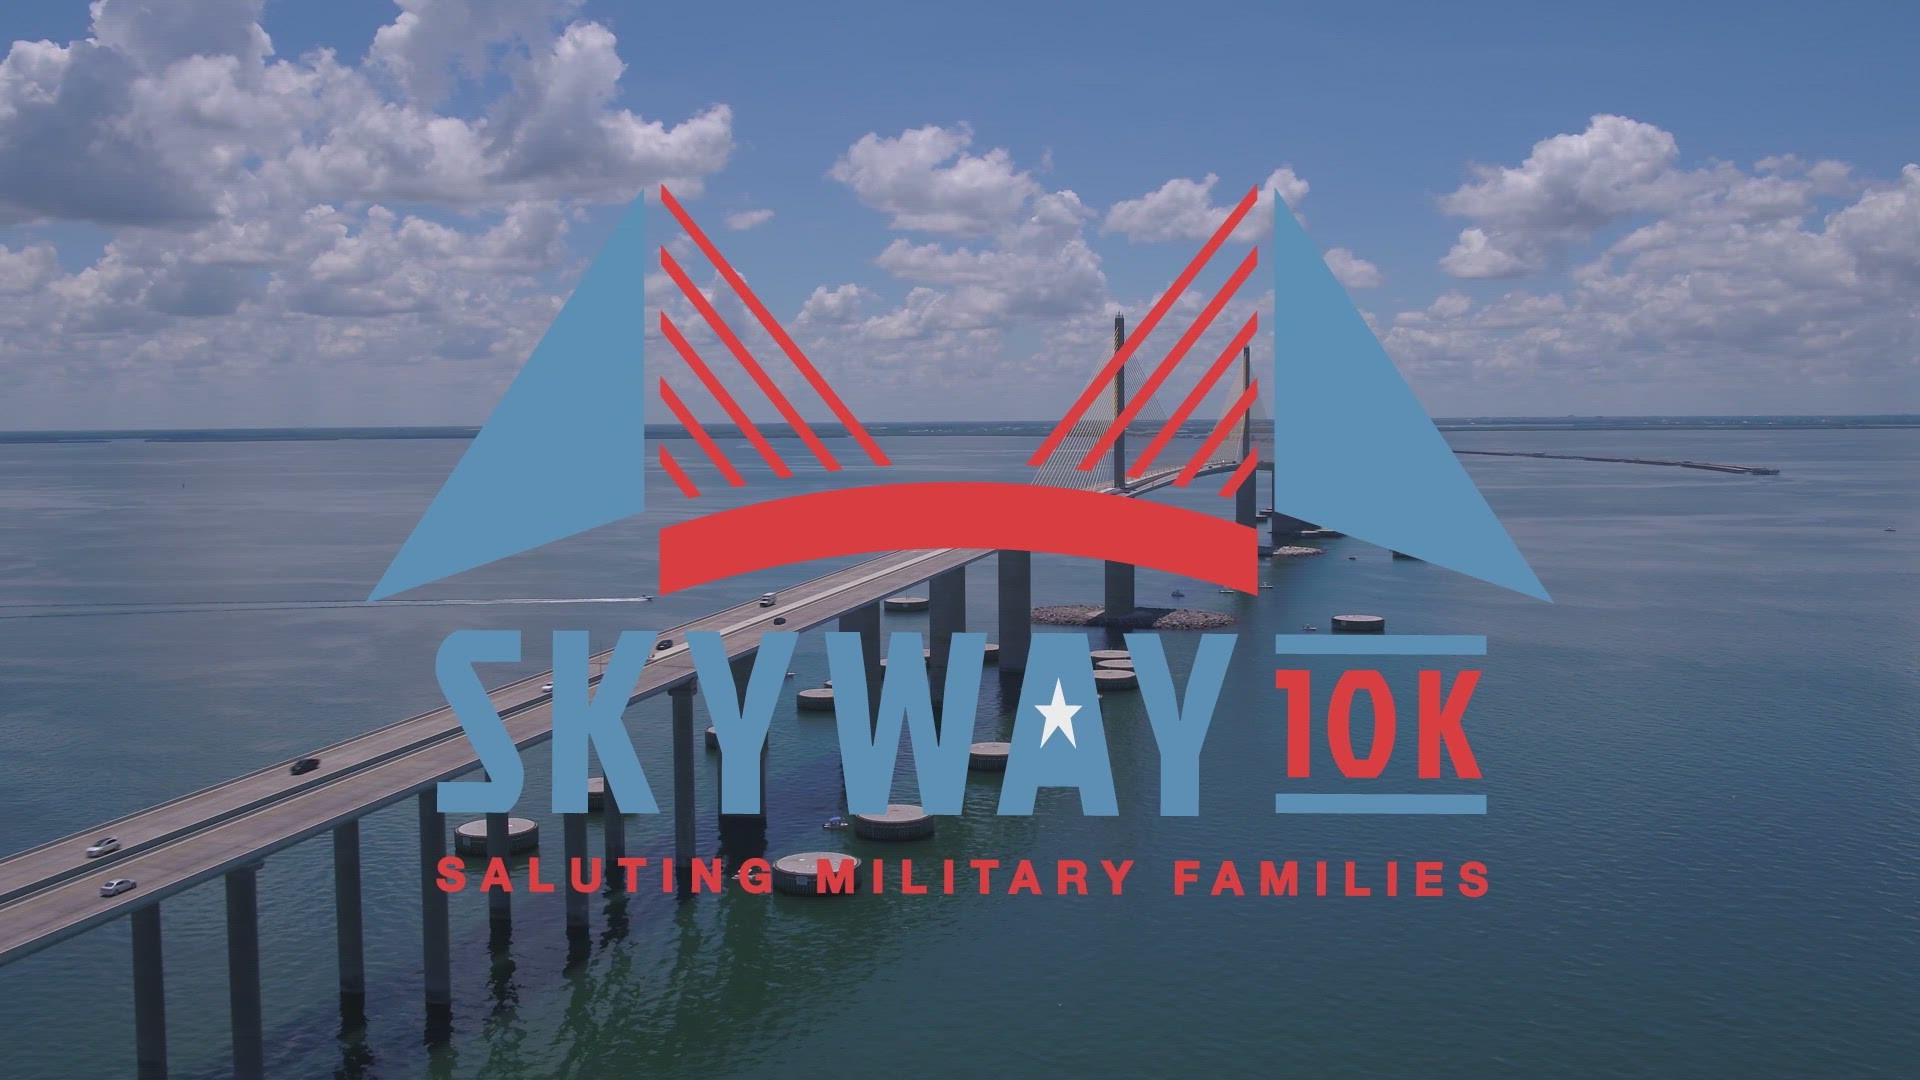 10 Tampa Bay and the Skyway 10K team thank you for supporting the Armed Forces Families Foundation.